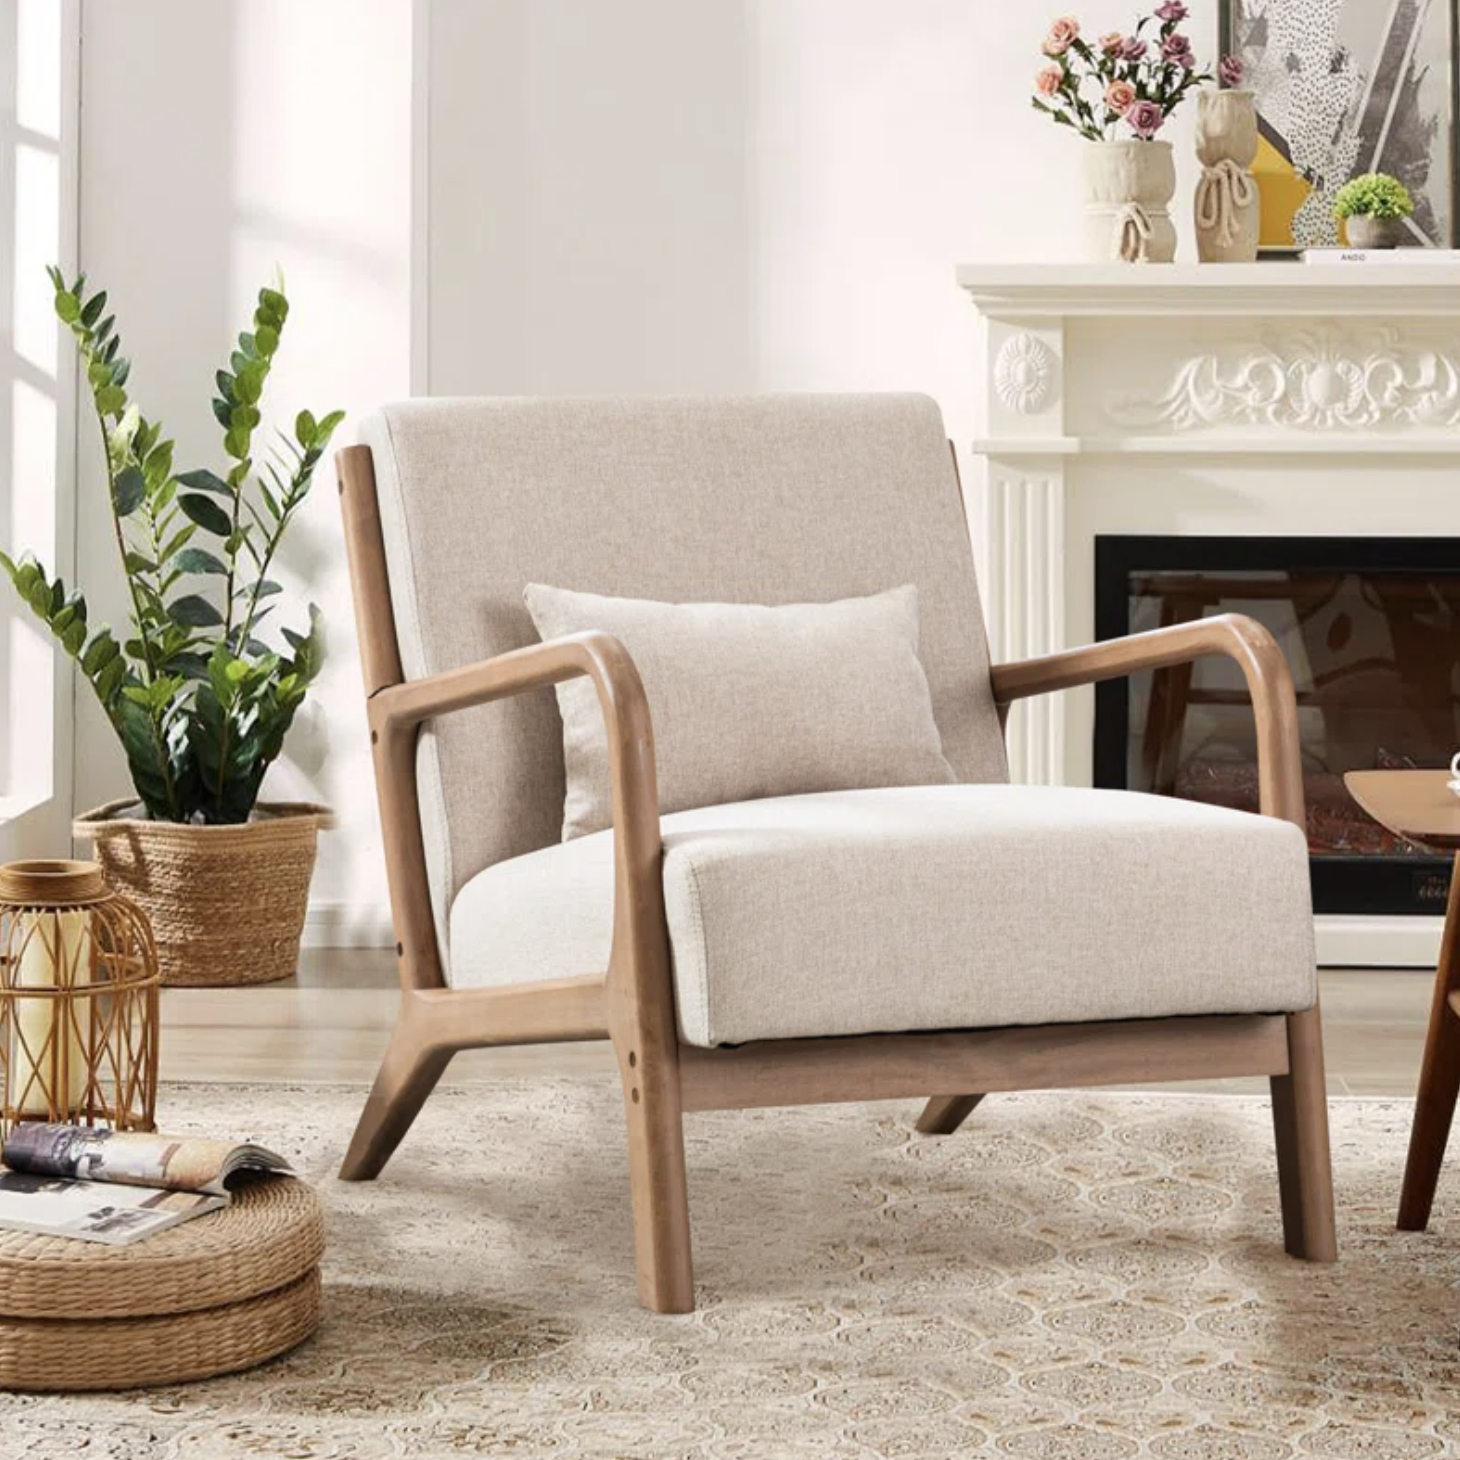 Modern armchair with wooden frame and cushioned seating, placed in a cozy living room setting